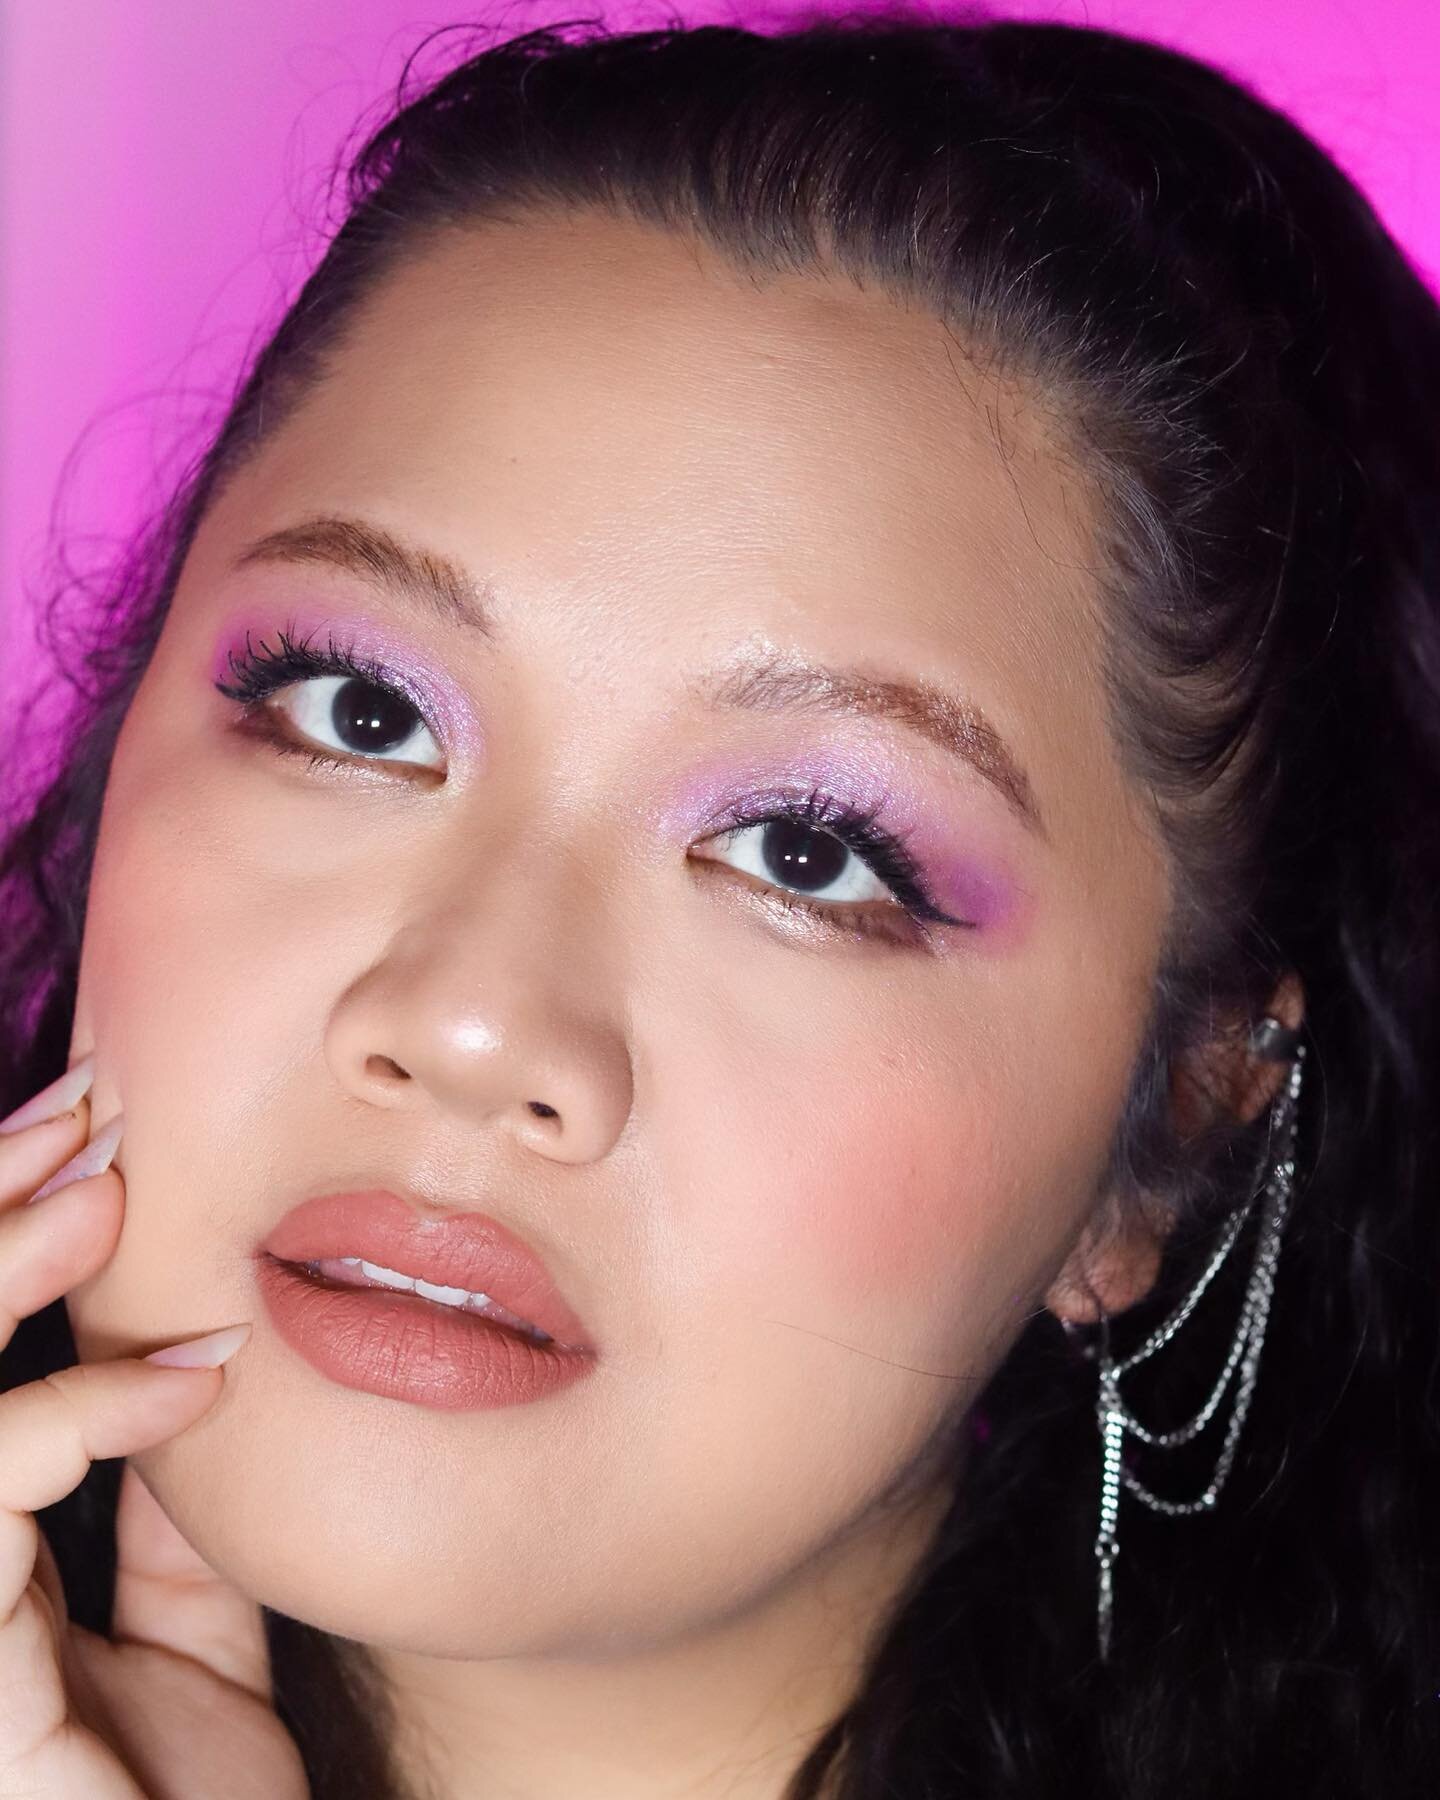 You know that sound that goes &quot;I'm me again?&quot; That's kinda how it felt playing with makeup after so long. #makeupartist #asianmakeupartist #asianmua #asianmakeuplook #makeuplook